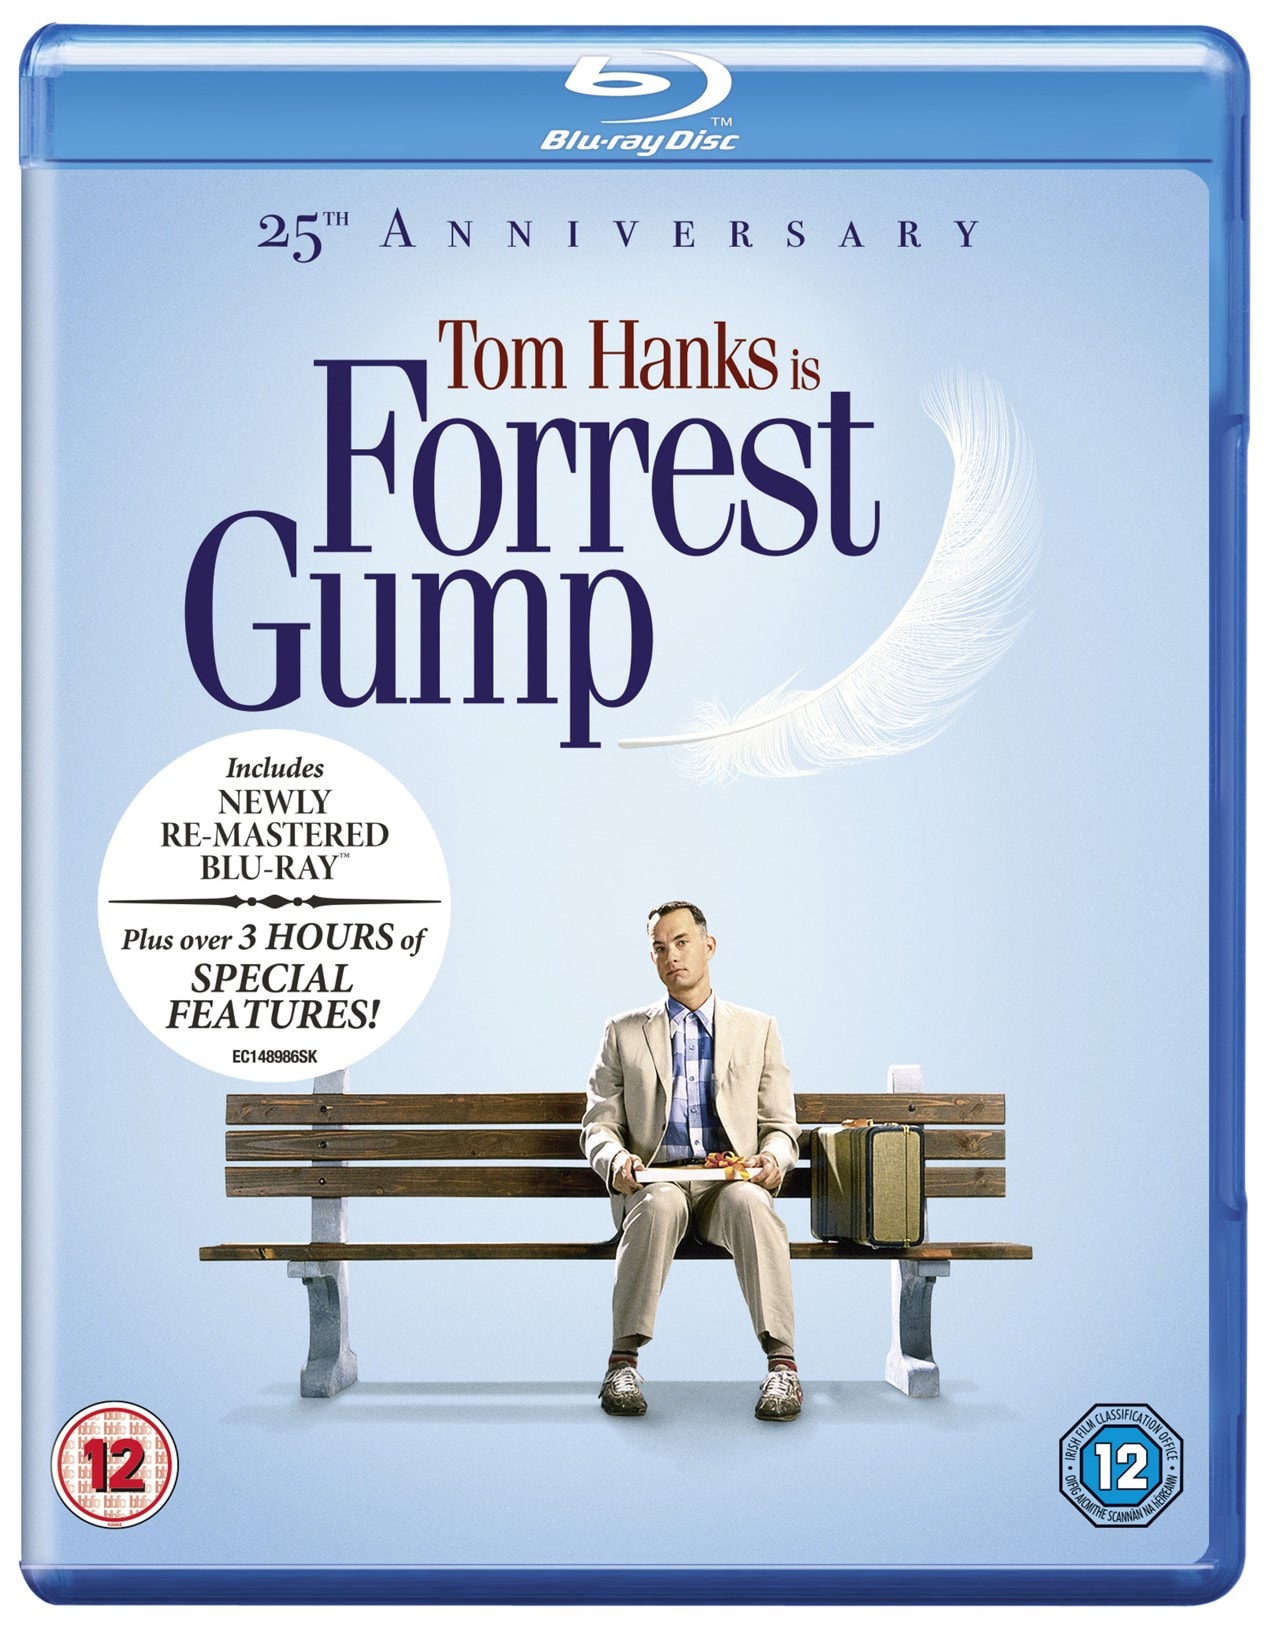 Forrest Gump | Blu-ray | Free shipping over £20 | HMV Store